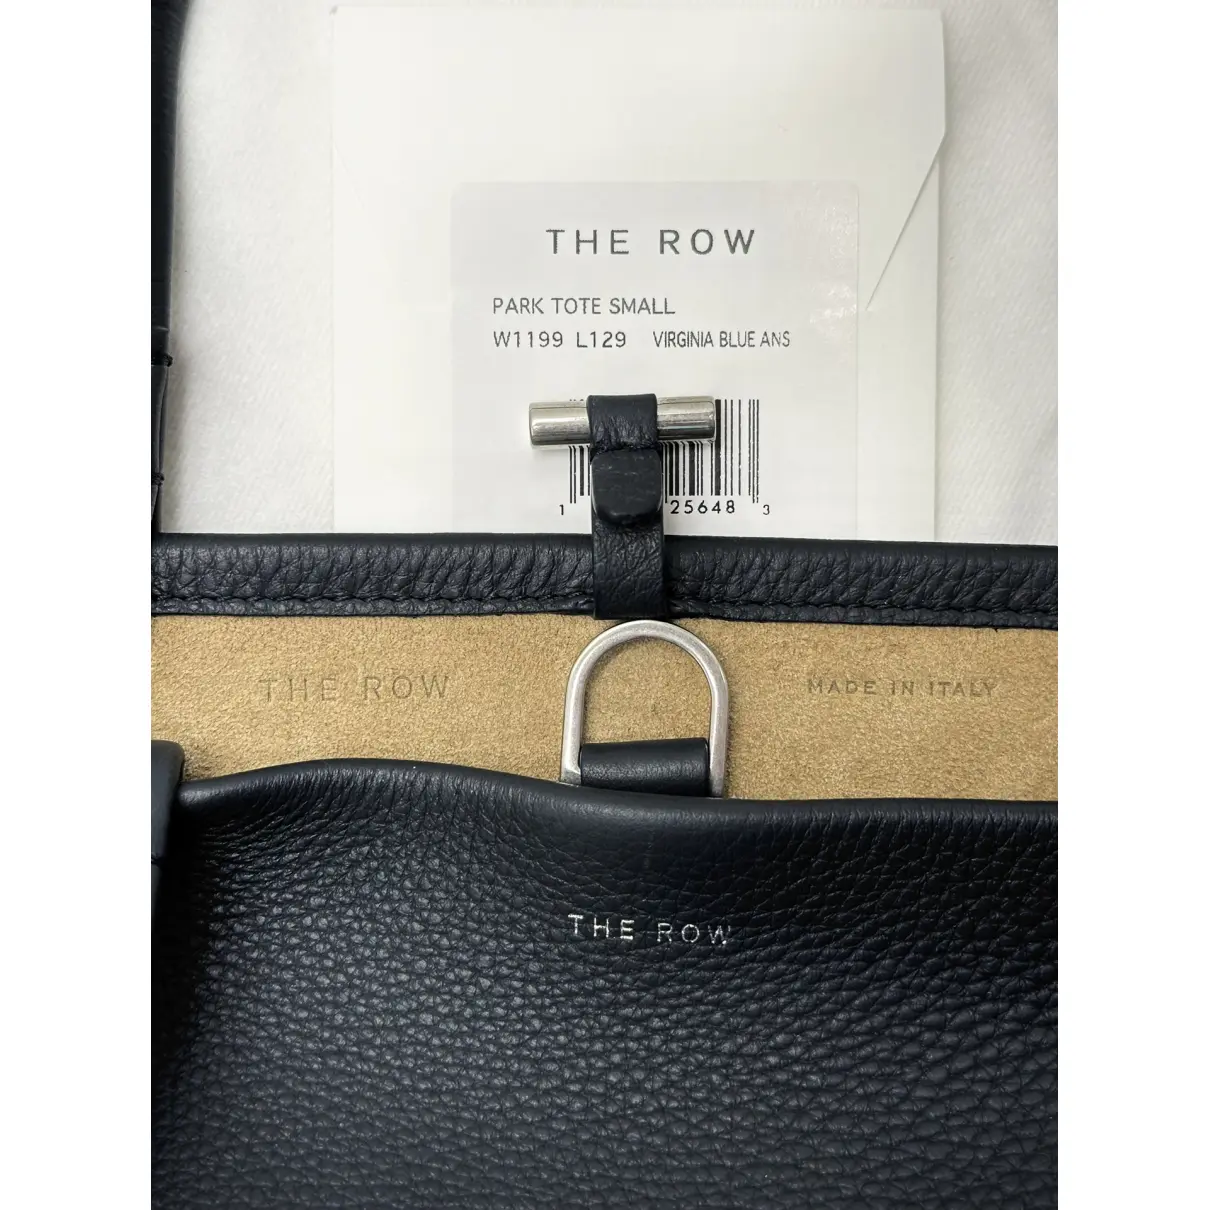 Buy The Row Leather crossbody bag online